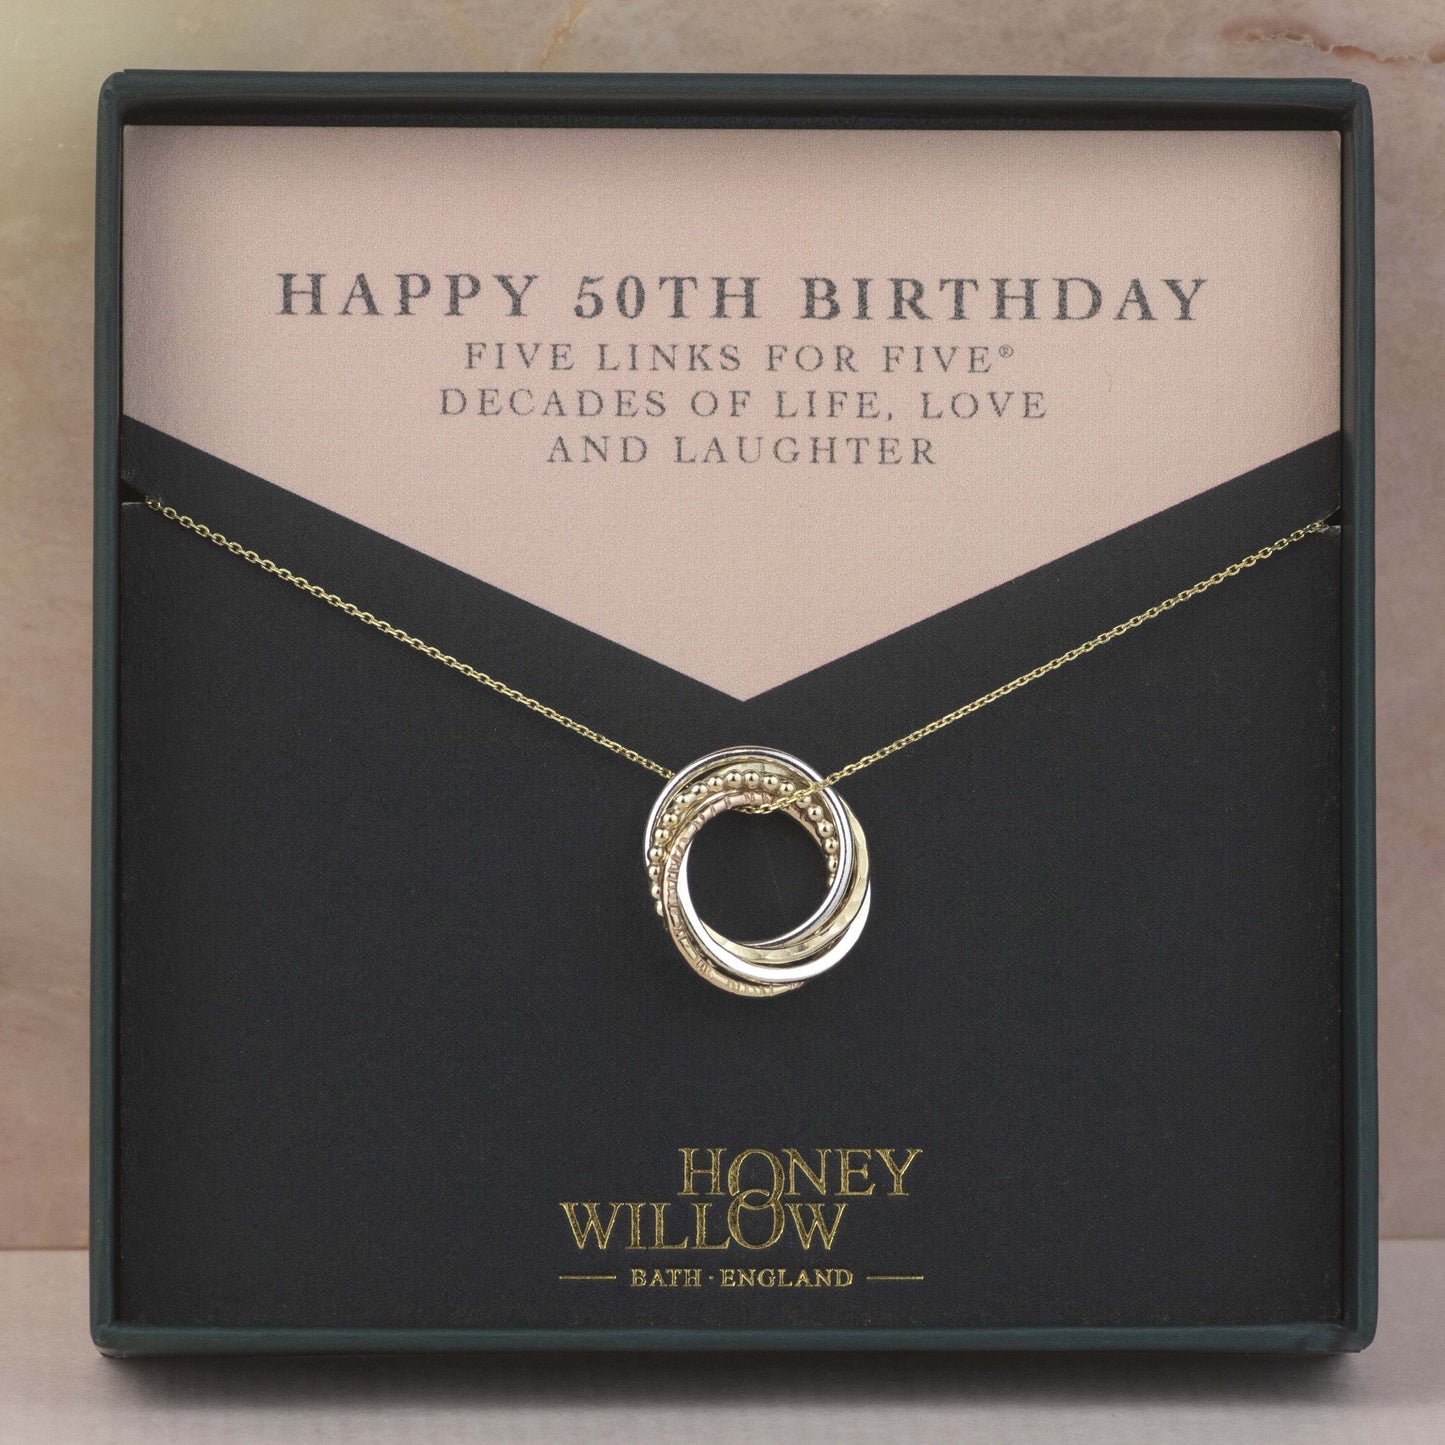 9kt Gold 50th Birthday Necklace - The Original 5 Links for 5 Decades Necklace - Petite Recycled Gold, Rose Gold & Silver